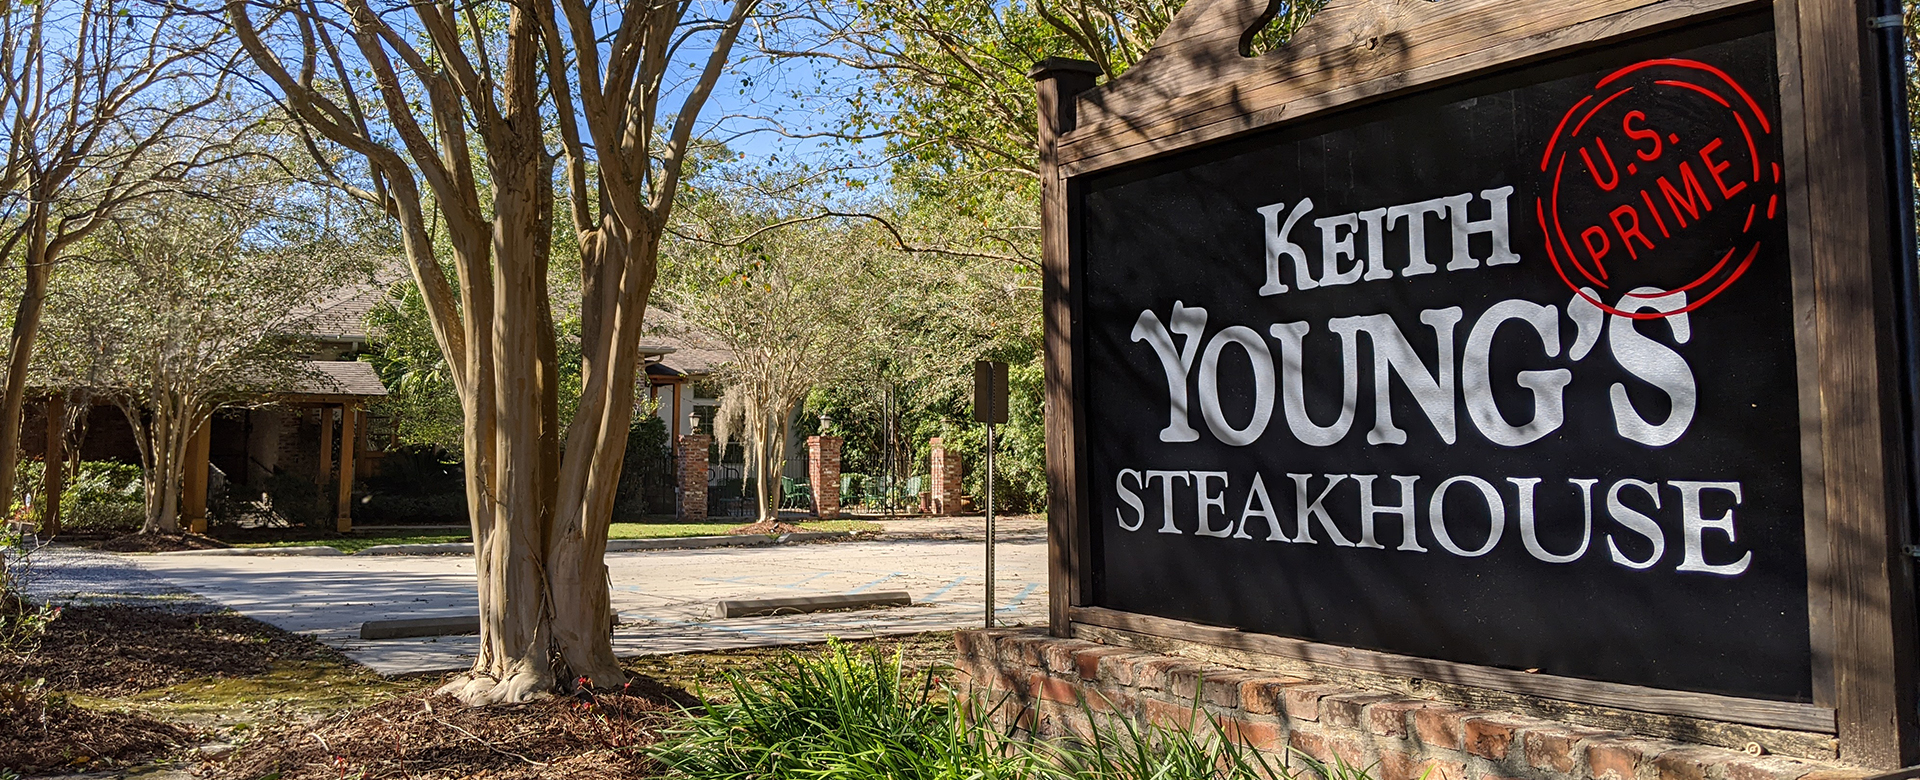 Keith Young's Steakhouse | Northshore's Favorite Steakhouse